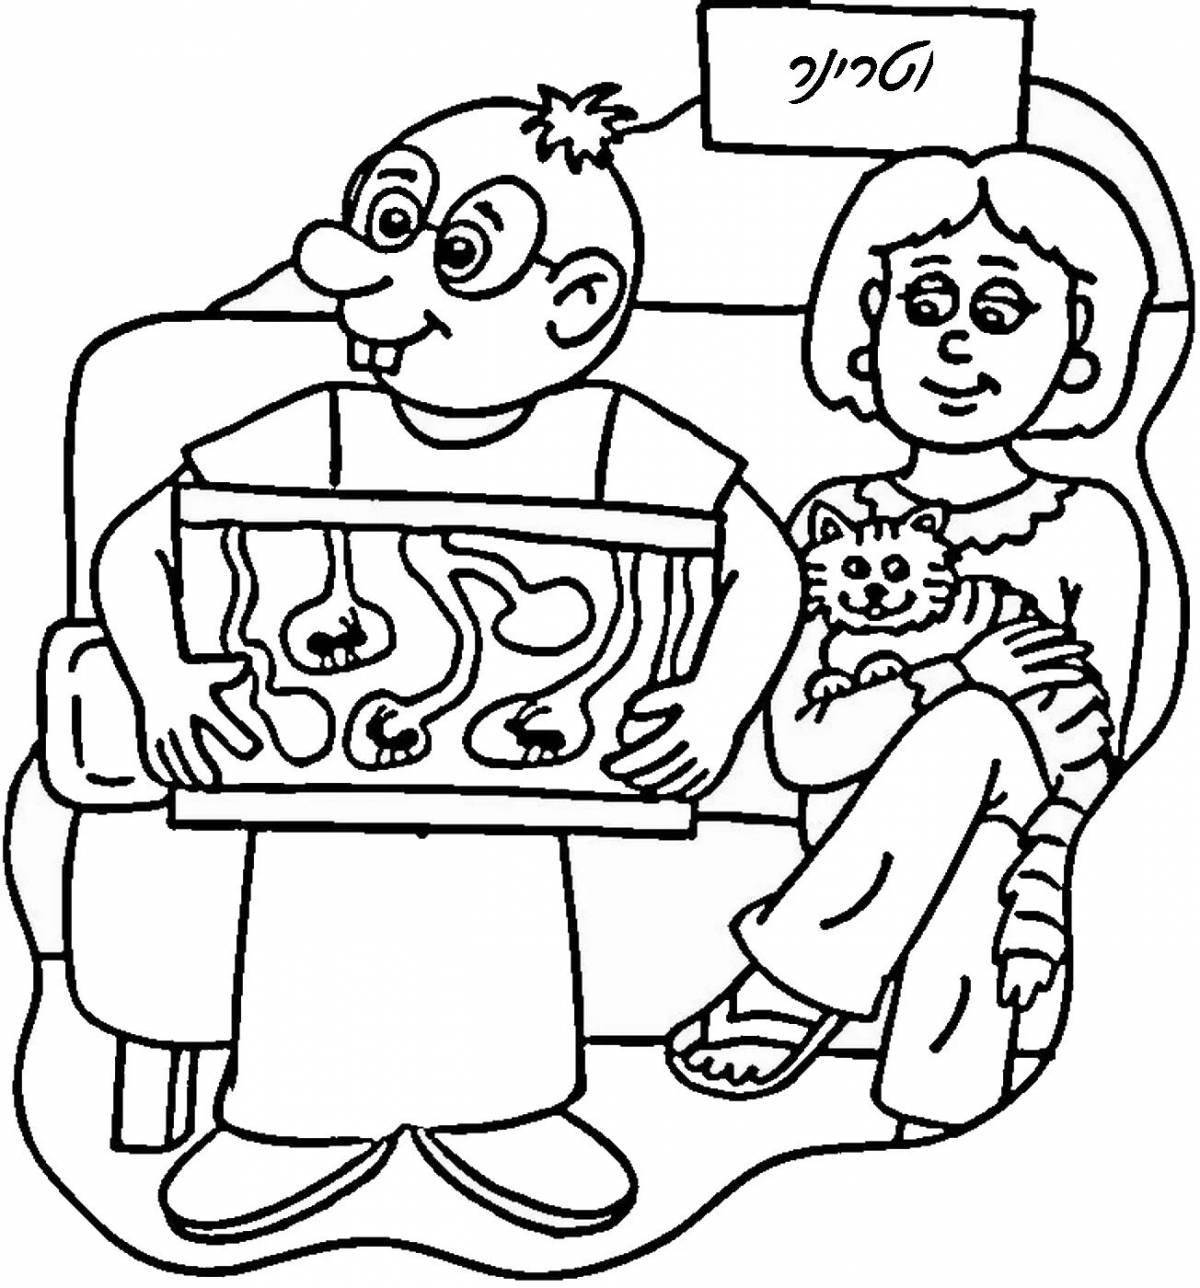 Colorful teacher coloring page